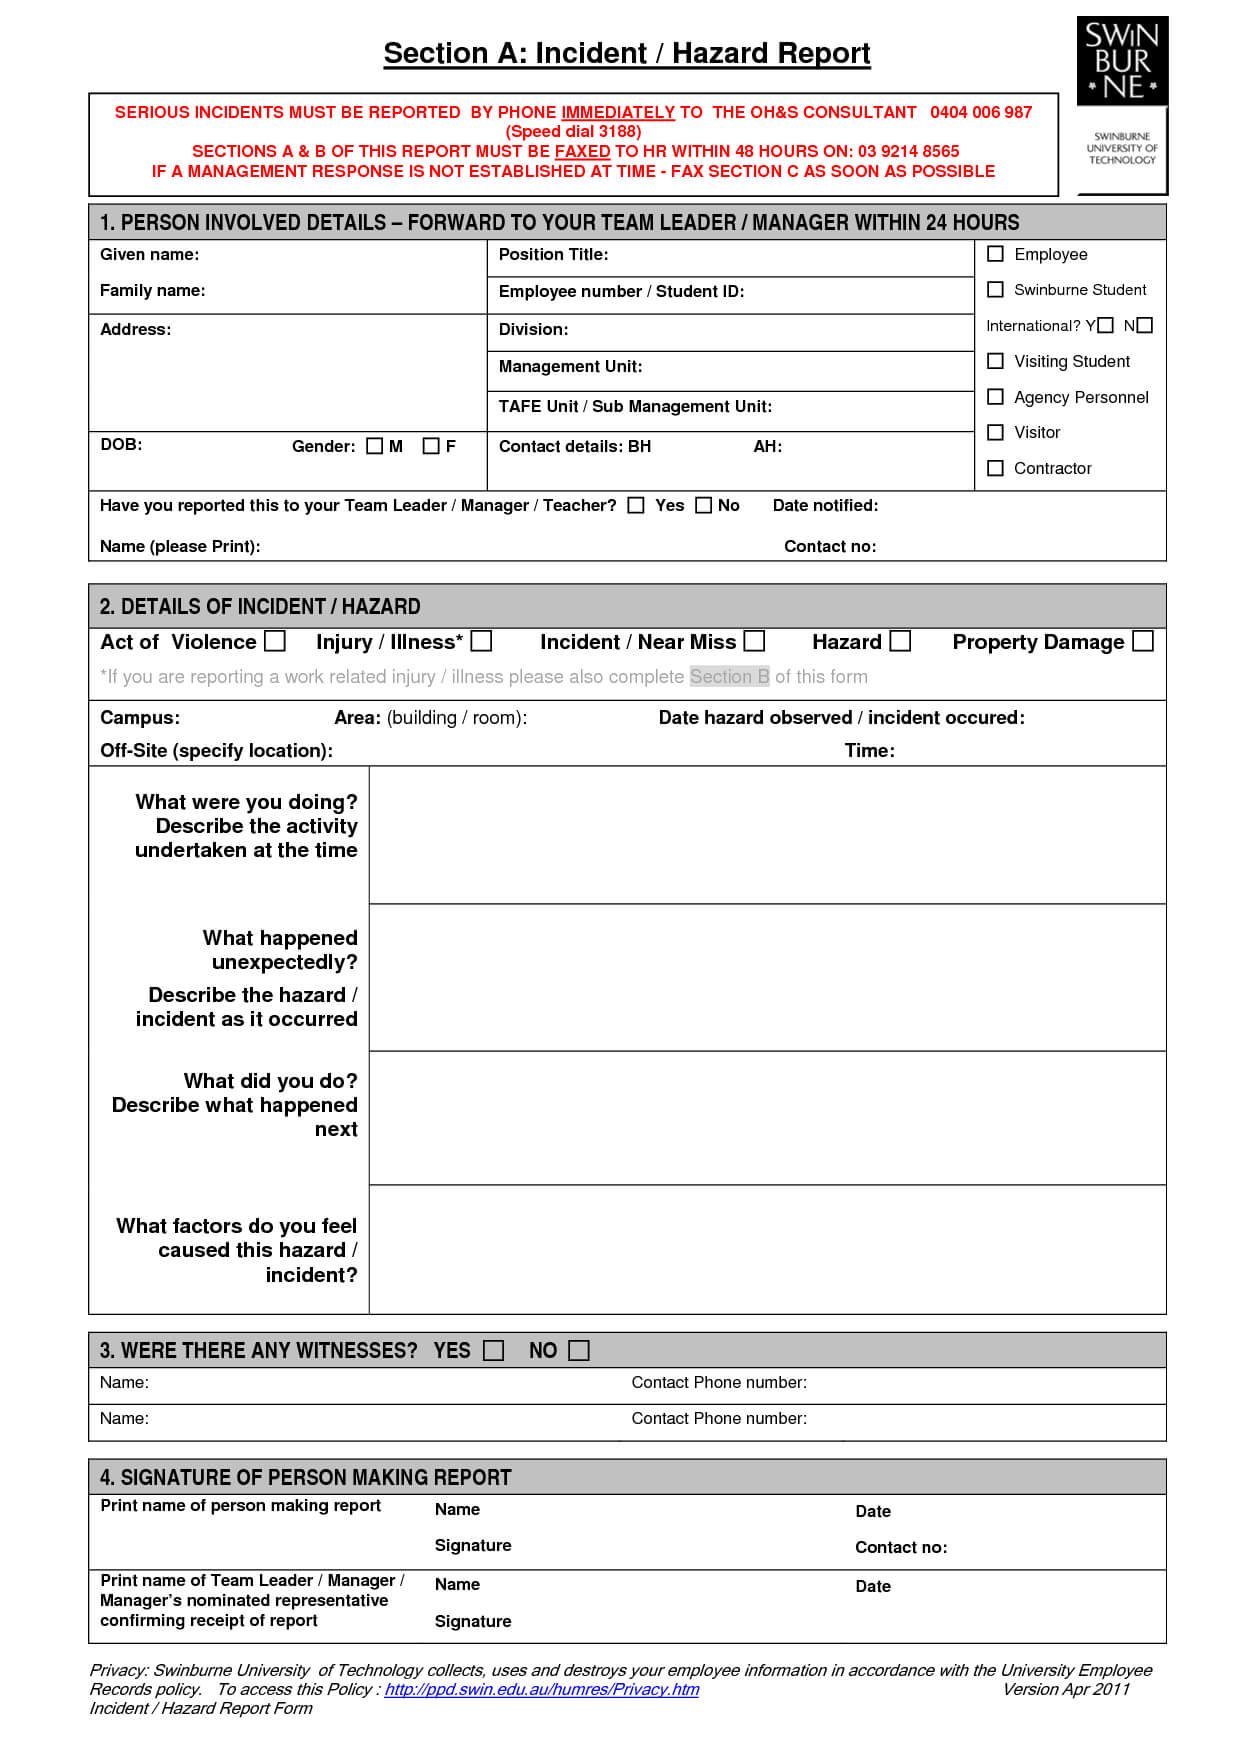 Technology Incident Report Template And Incident Report In Incident Hazard Report Form Template